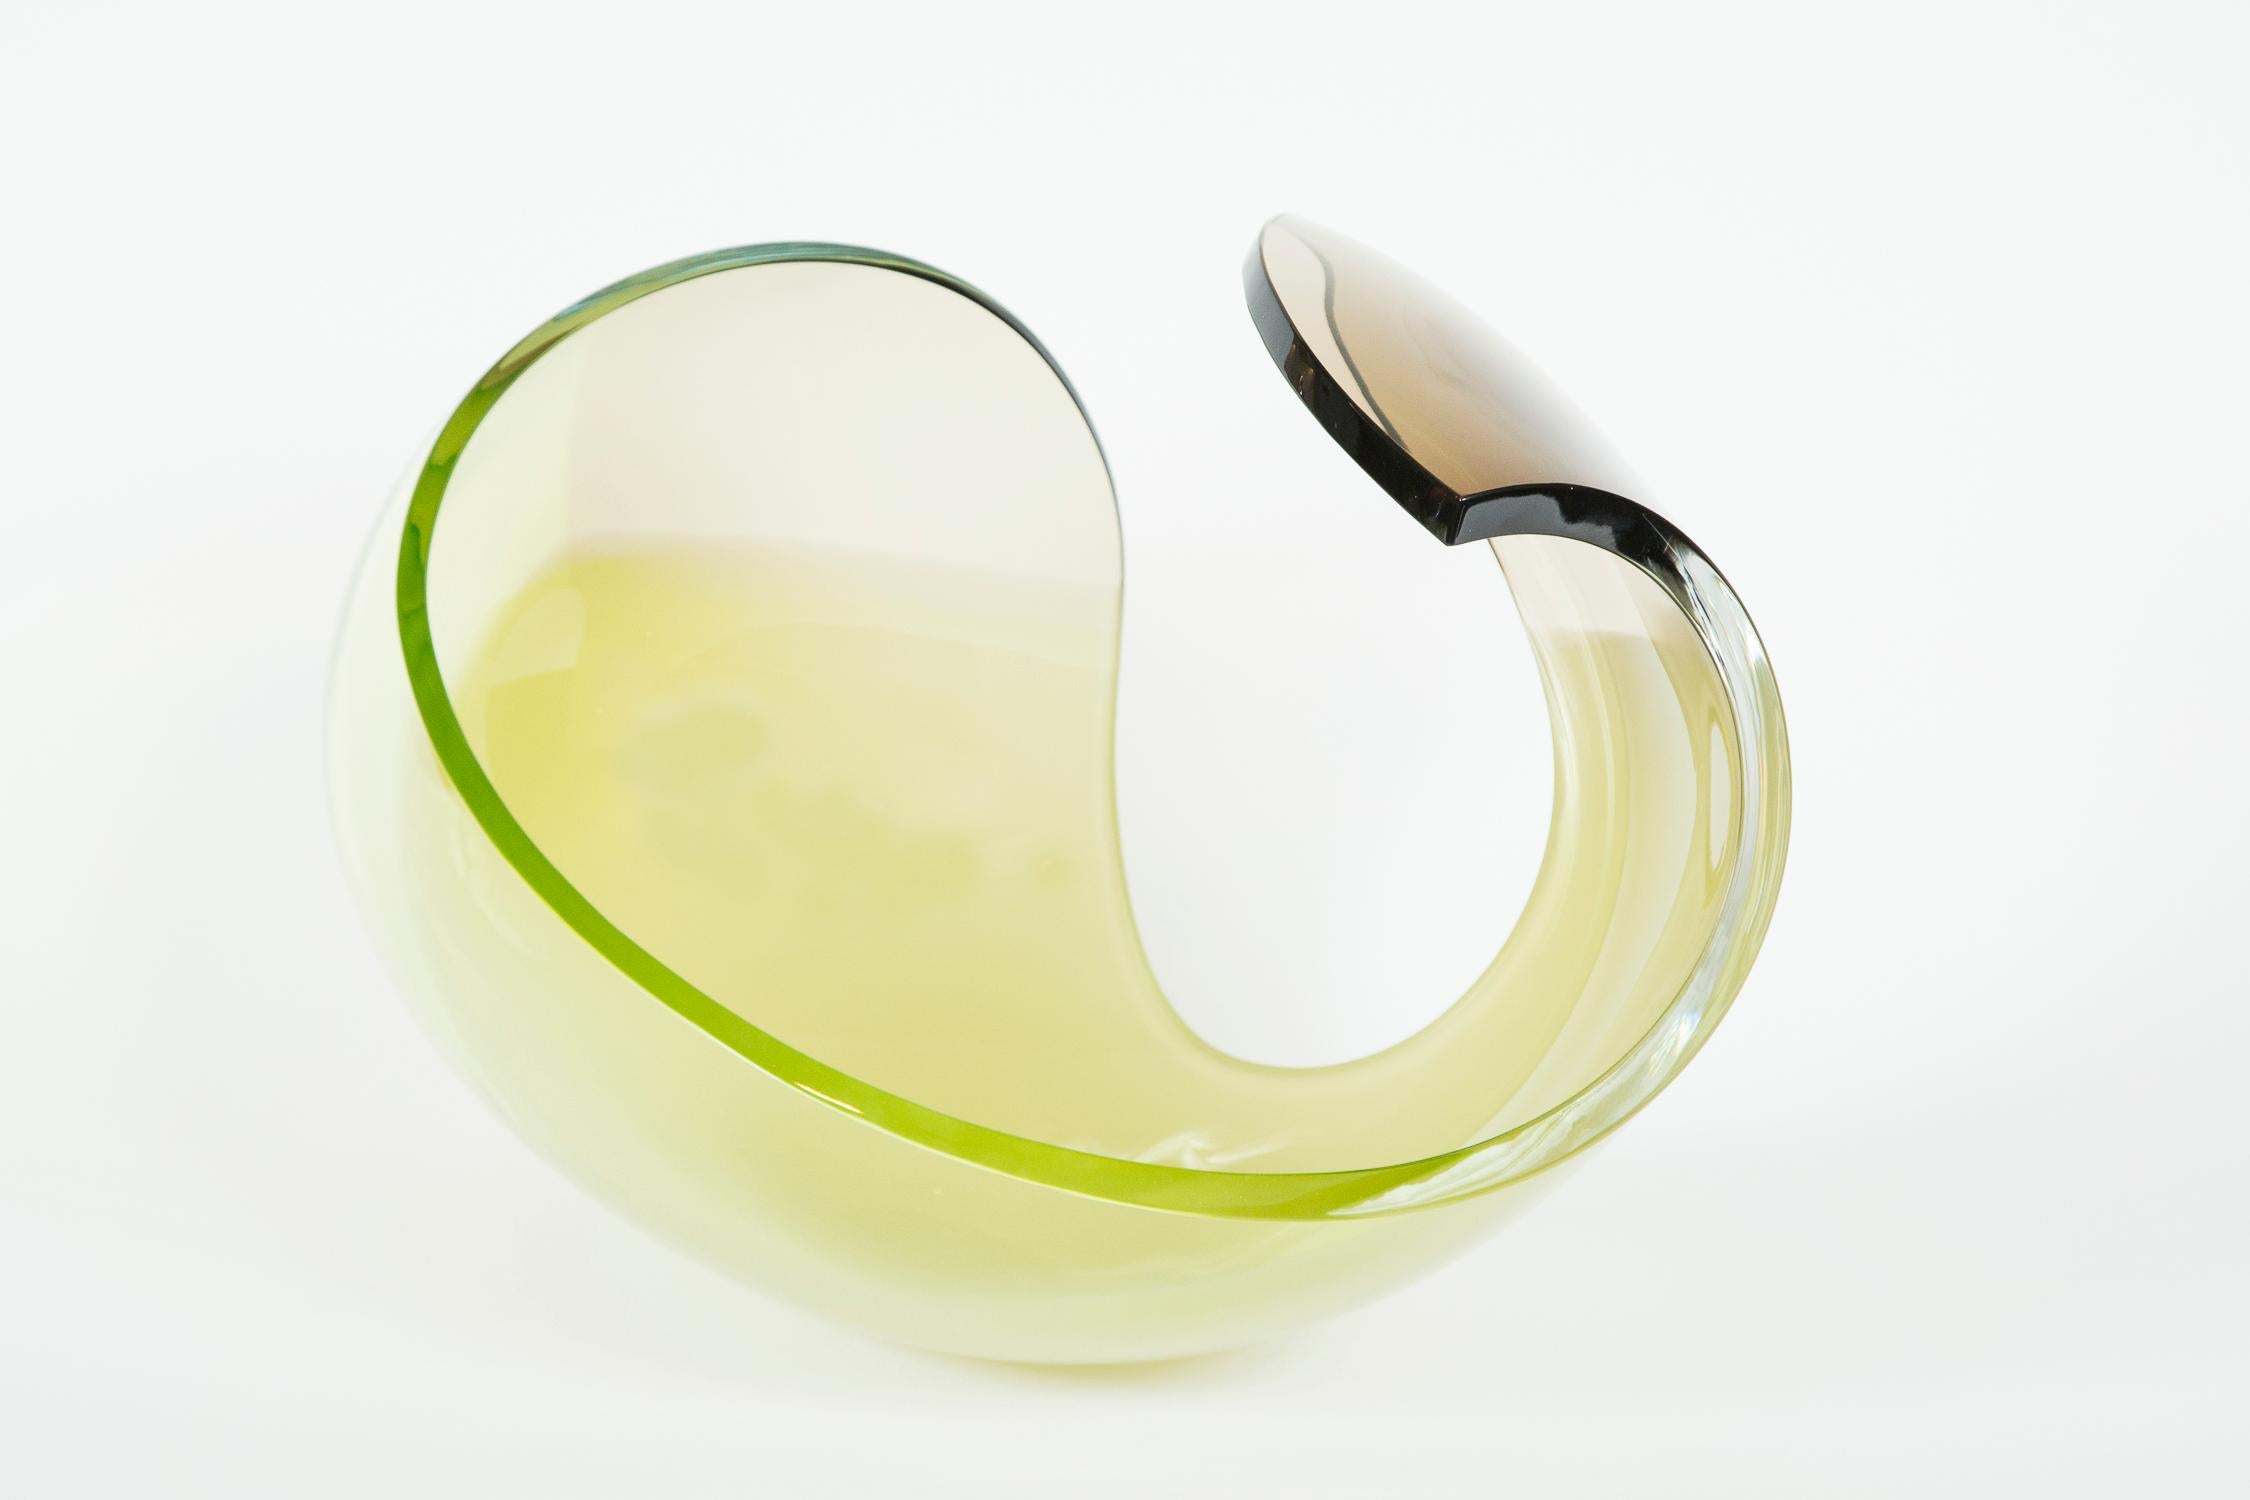 Focus & elegance; dramatic sharp graphic shapes; fluid & sensuous curves - just some of the words that spring to mind when looking at the work of Lena Bergström. Vessel is proud to represent the work of this Swedish star, whose designs are as sharp